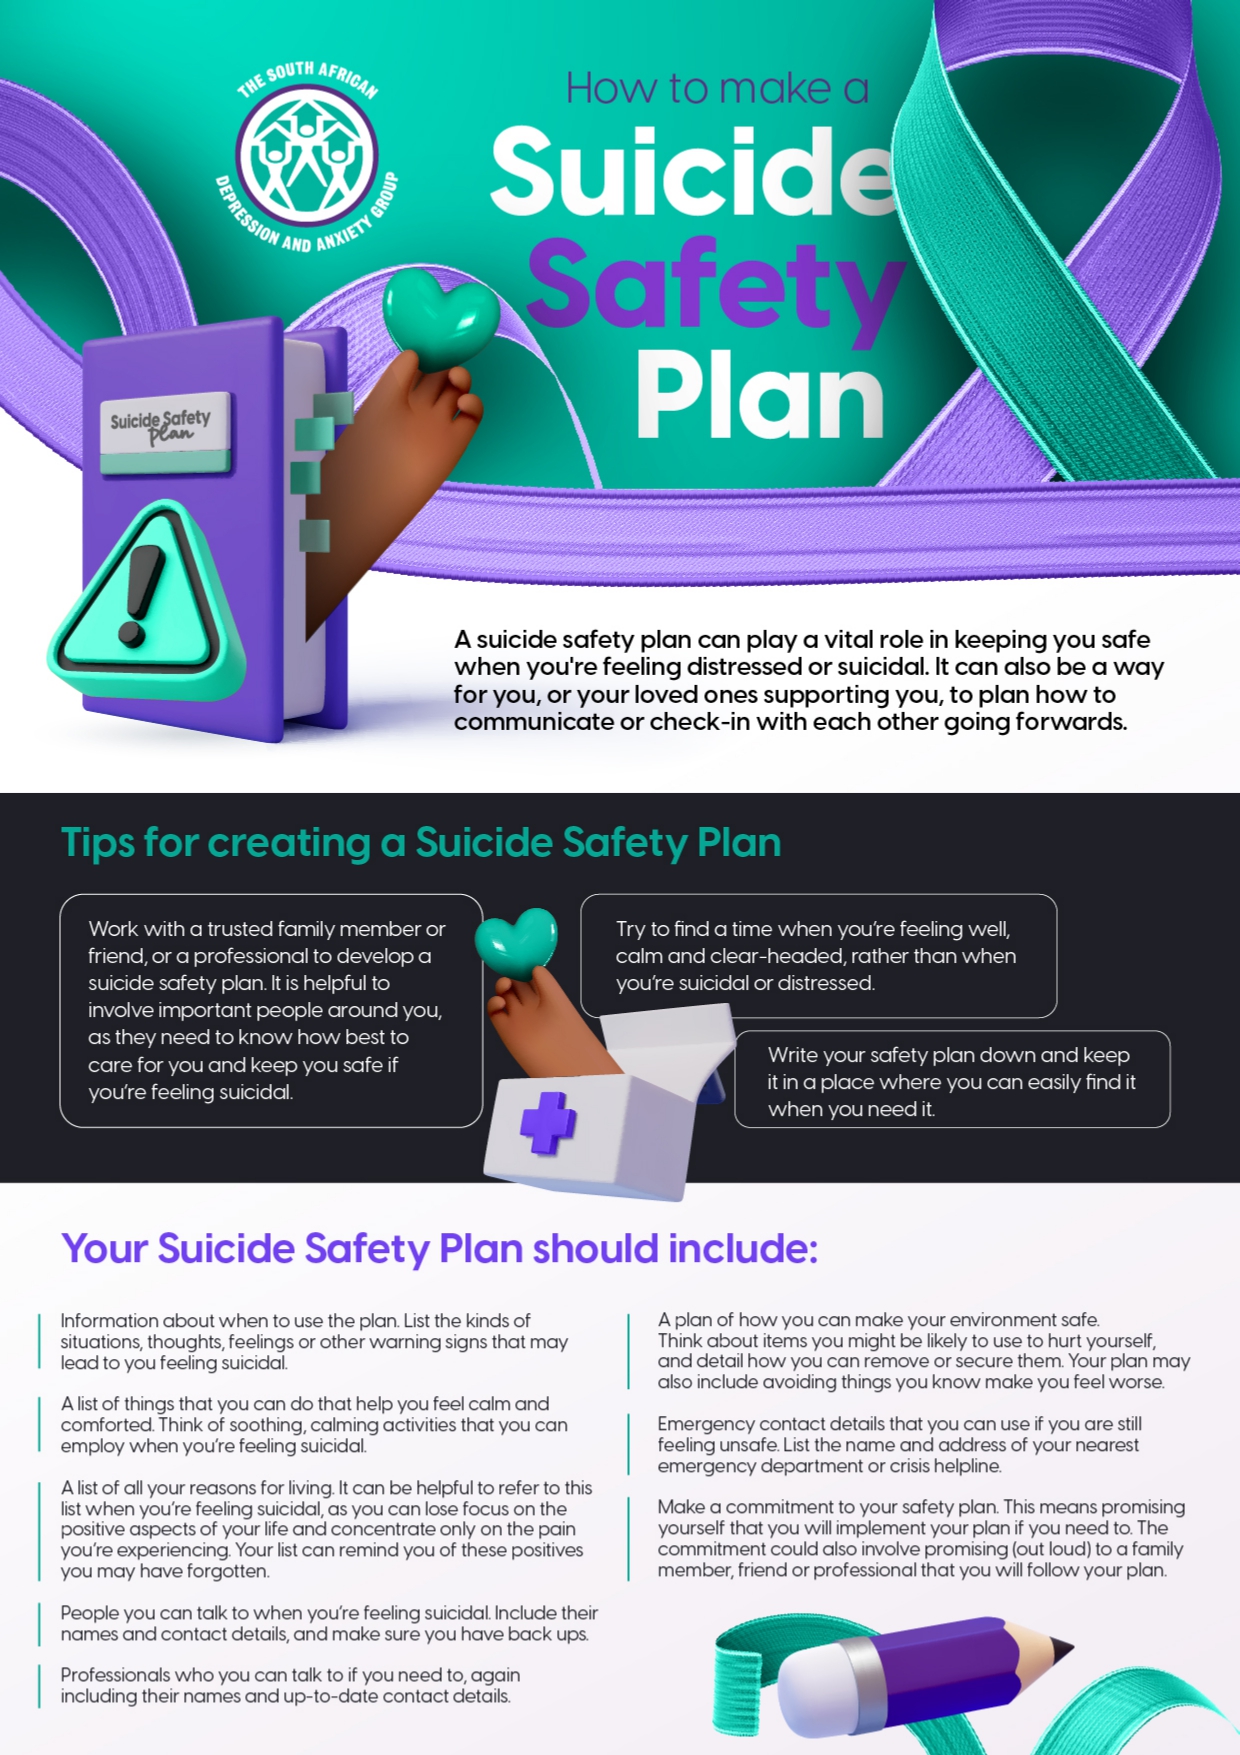 Suicide Safety Plan